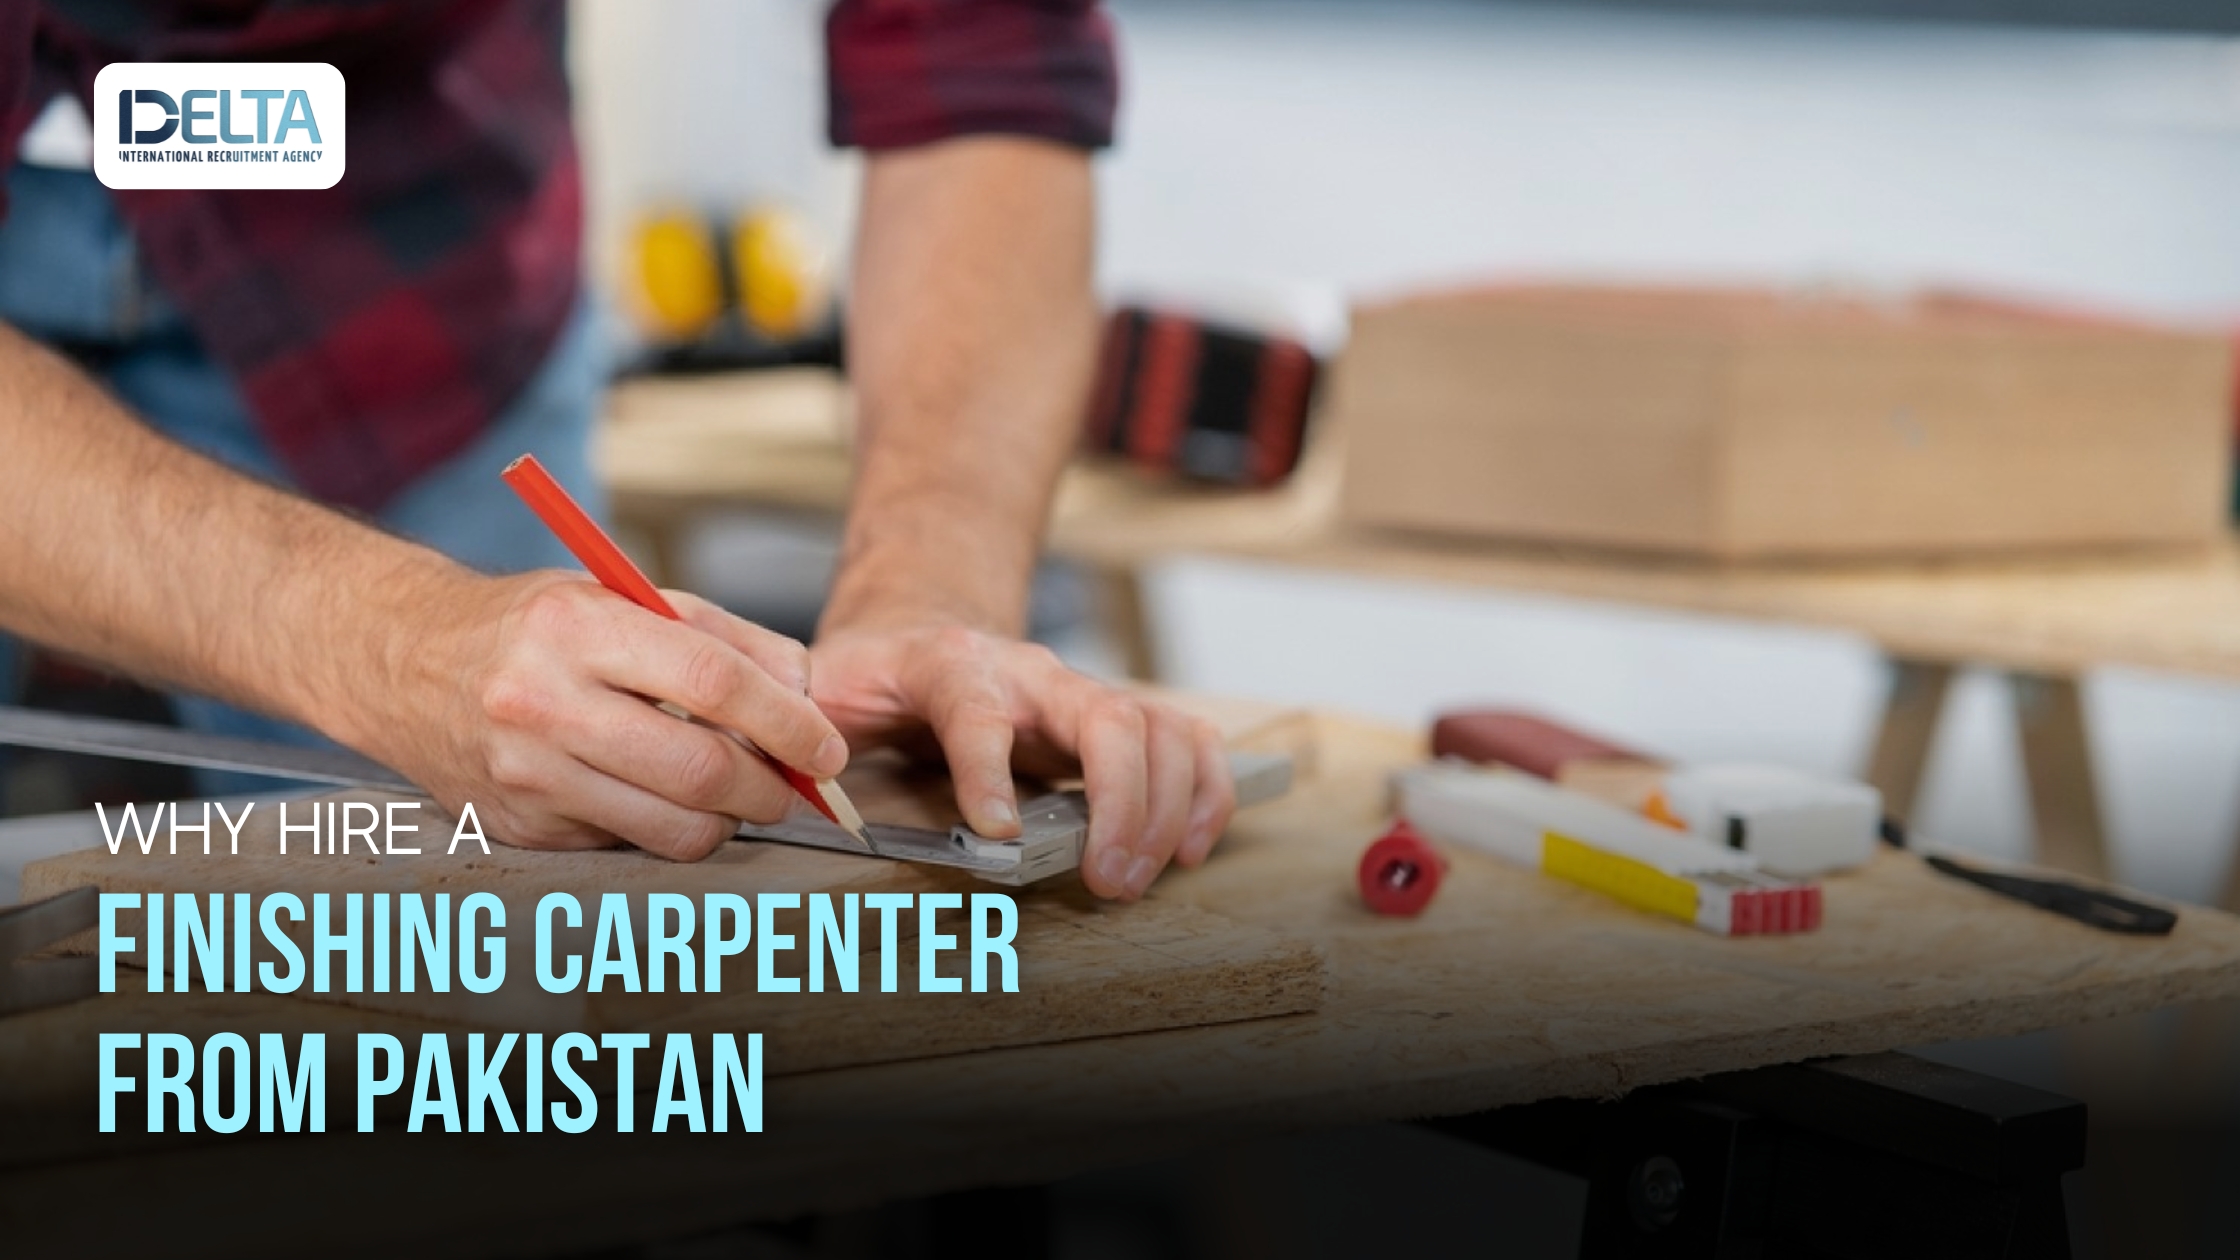 Why Hire a Finishing Carpenter from Pakistan